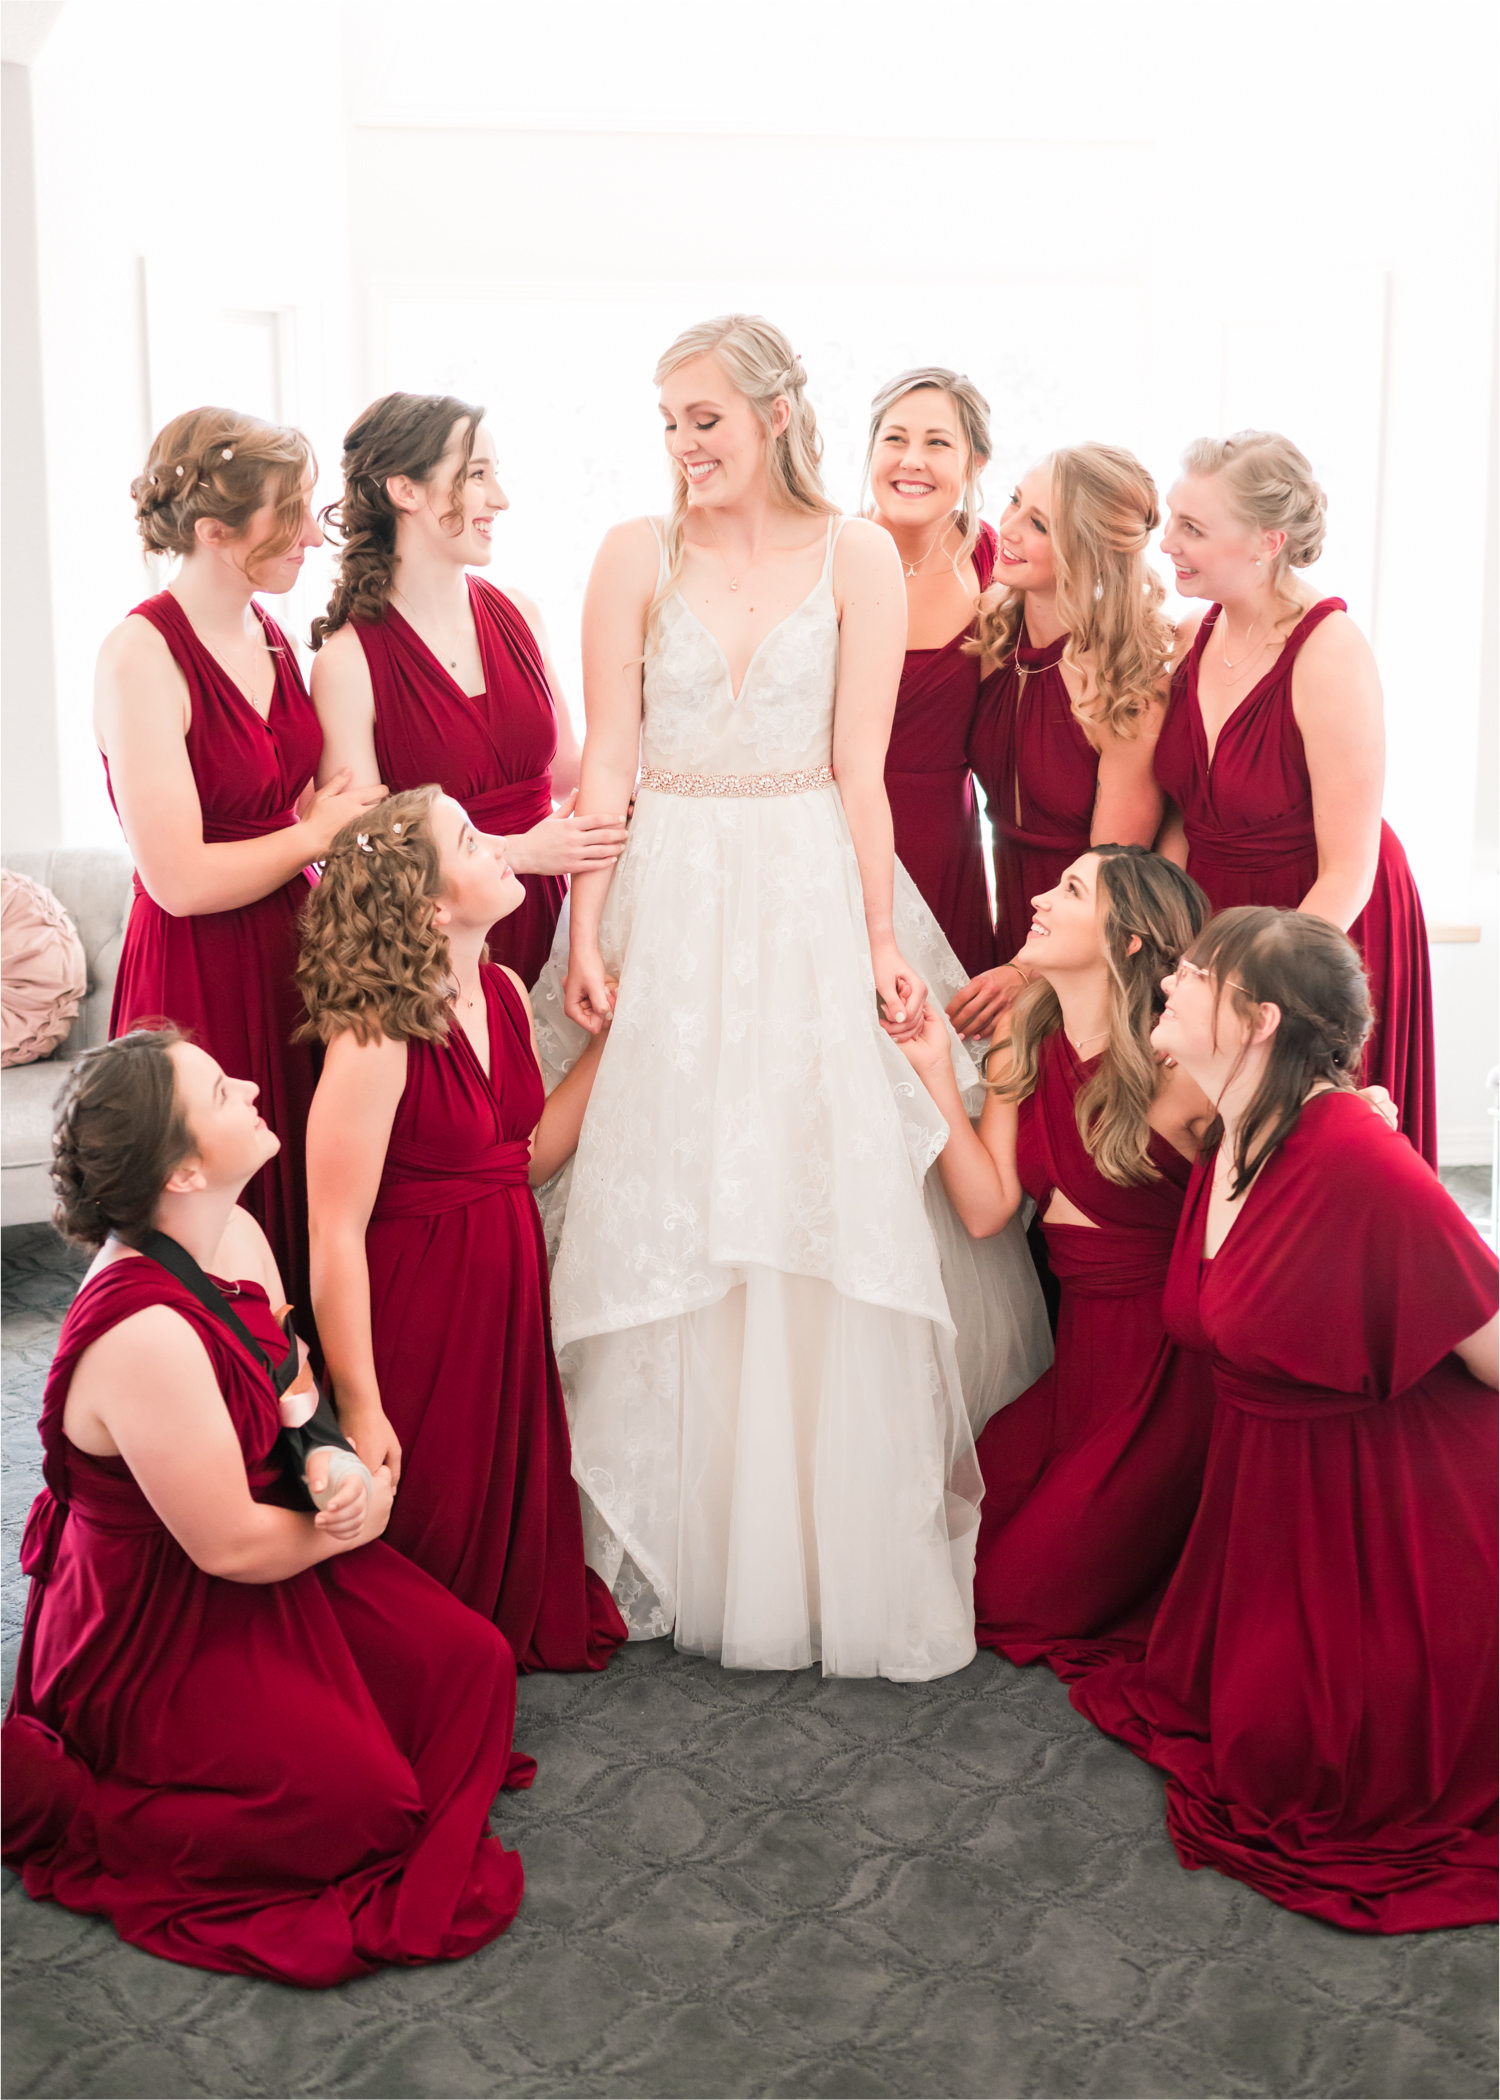 Romantic Whimsical Wedding at the Lionscrest Manor in Lyons, CO | Britni Girard Photography - Wedding Photo and Video Team | Rustic Fall Decor mixed in Burgundy, Blush, Gold and Sage | Wedding Dress from Anna Be Bridal by Hailey Paige | Hair and Makeup by Glam 5280 Chaundra Revier | Bridesmaids getting ready in Burgundy wrap dresses